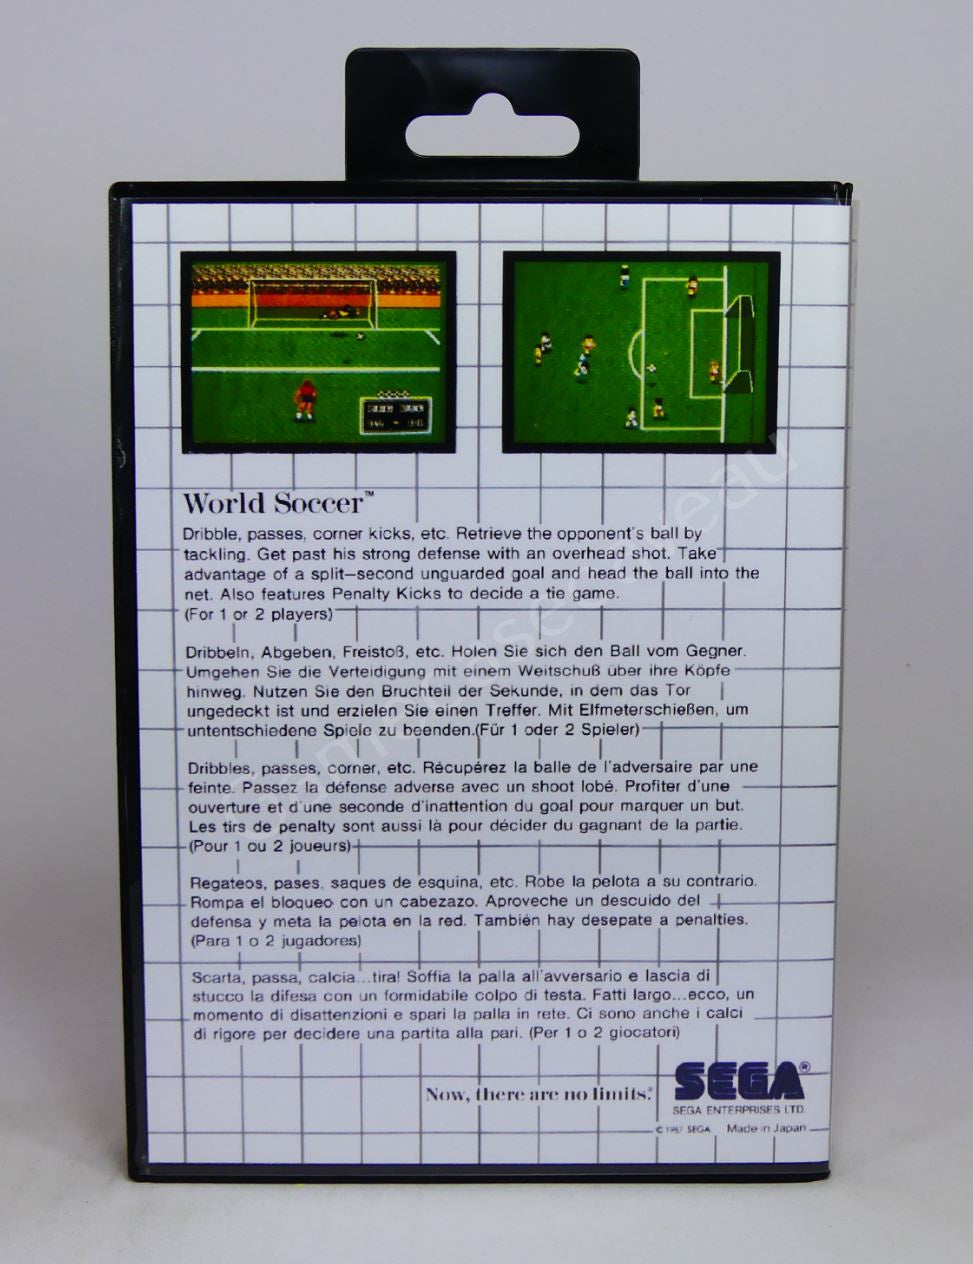 World Soccer - SMS Replacement Case